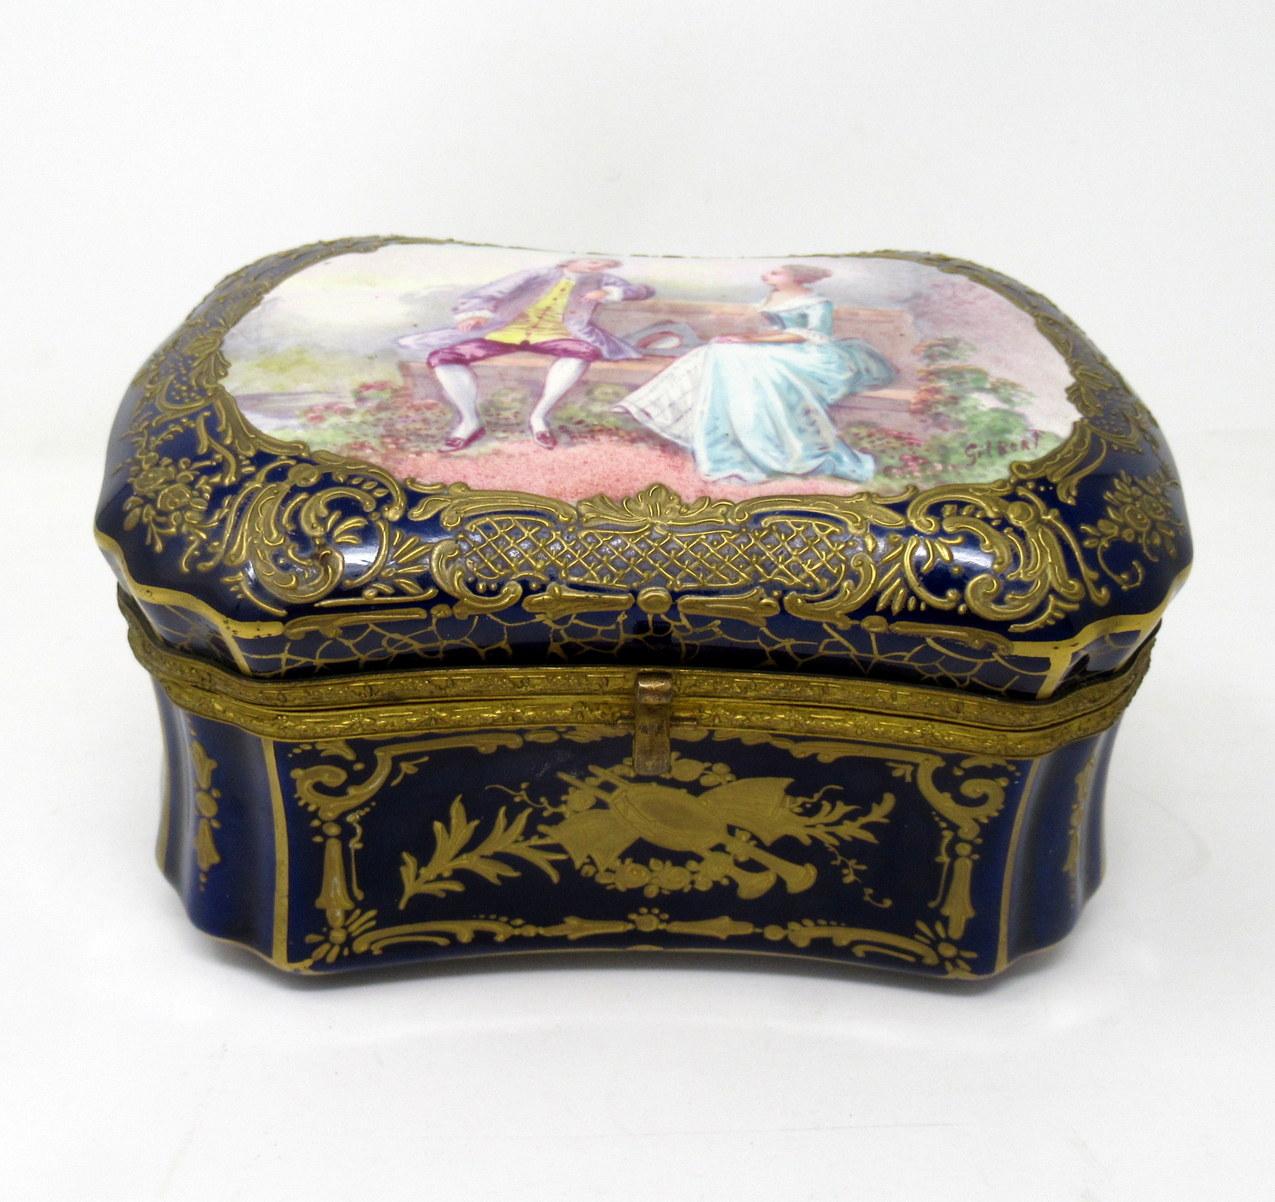 A very fine quality French Sevres hand decorated signed ladies jewlery casket or dresser box of outstanding museum quality and quite generous proportions. The rectangular outline with canted lobed corners, mid-late 19th century. Signed lower right